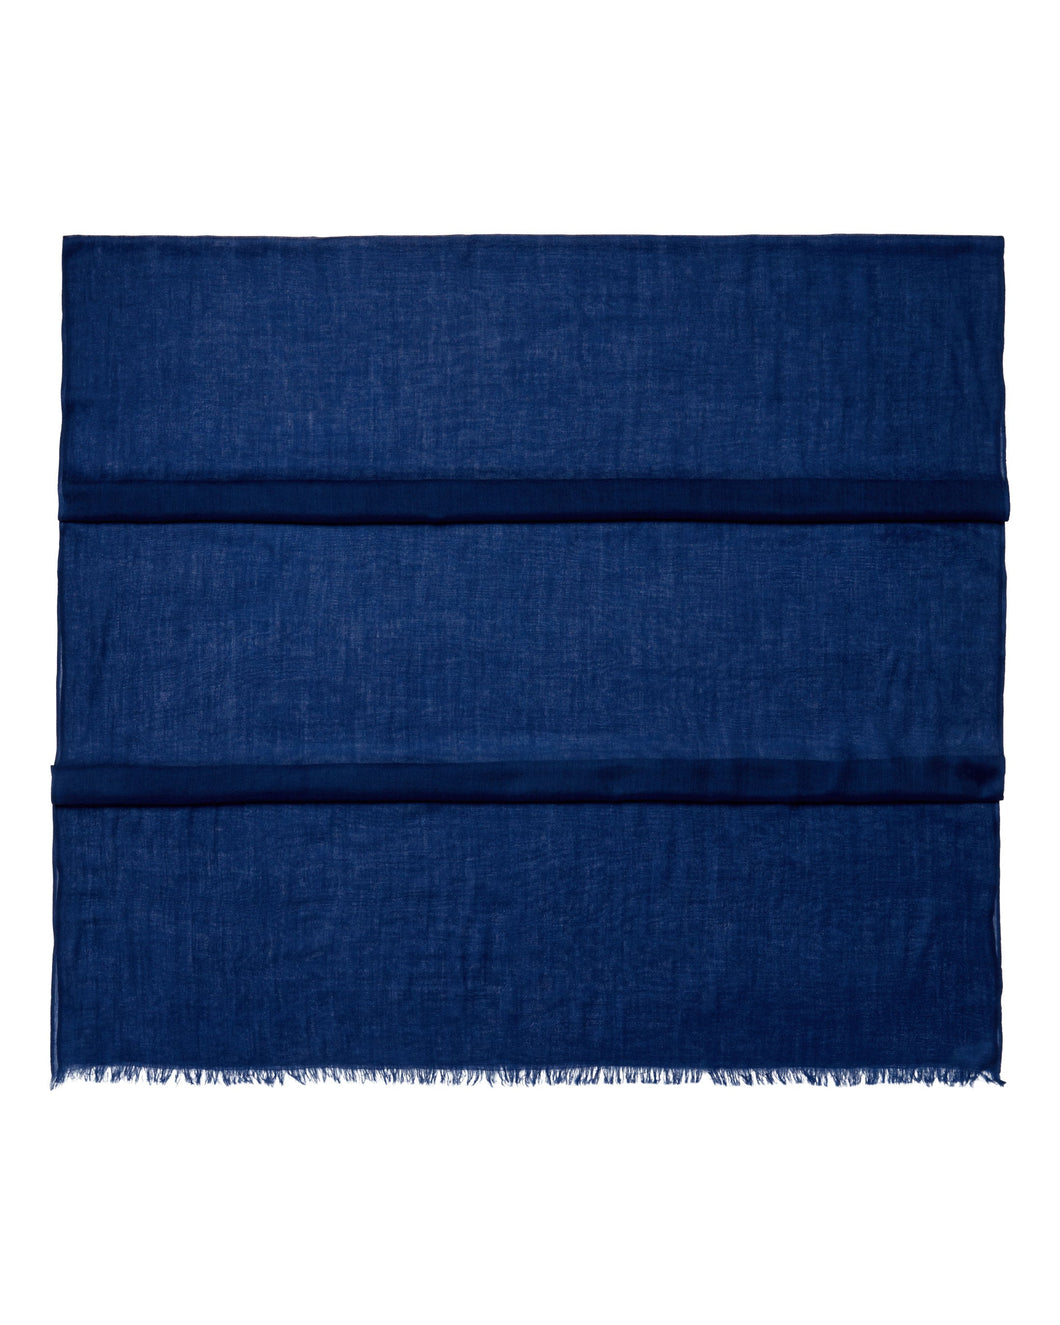 N.Peal Women's Ultrafine Pashmina Cashmere Shawl French Blue